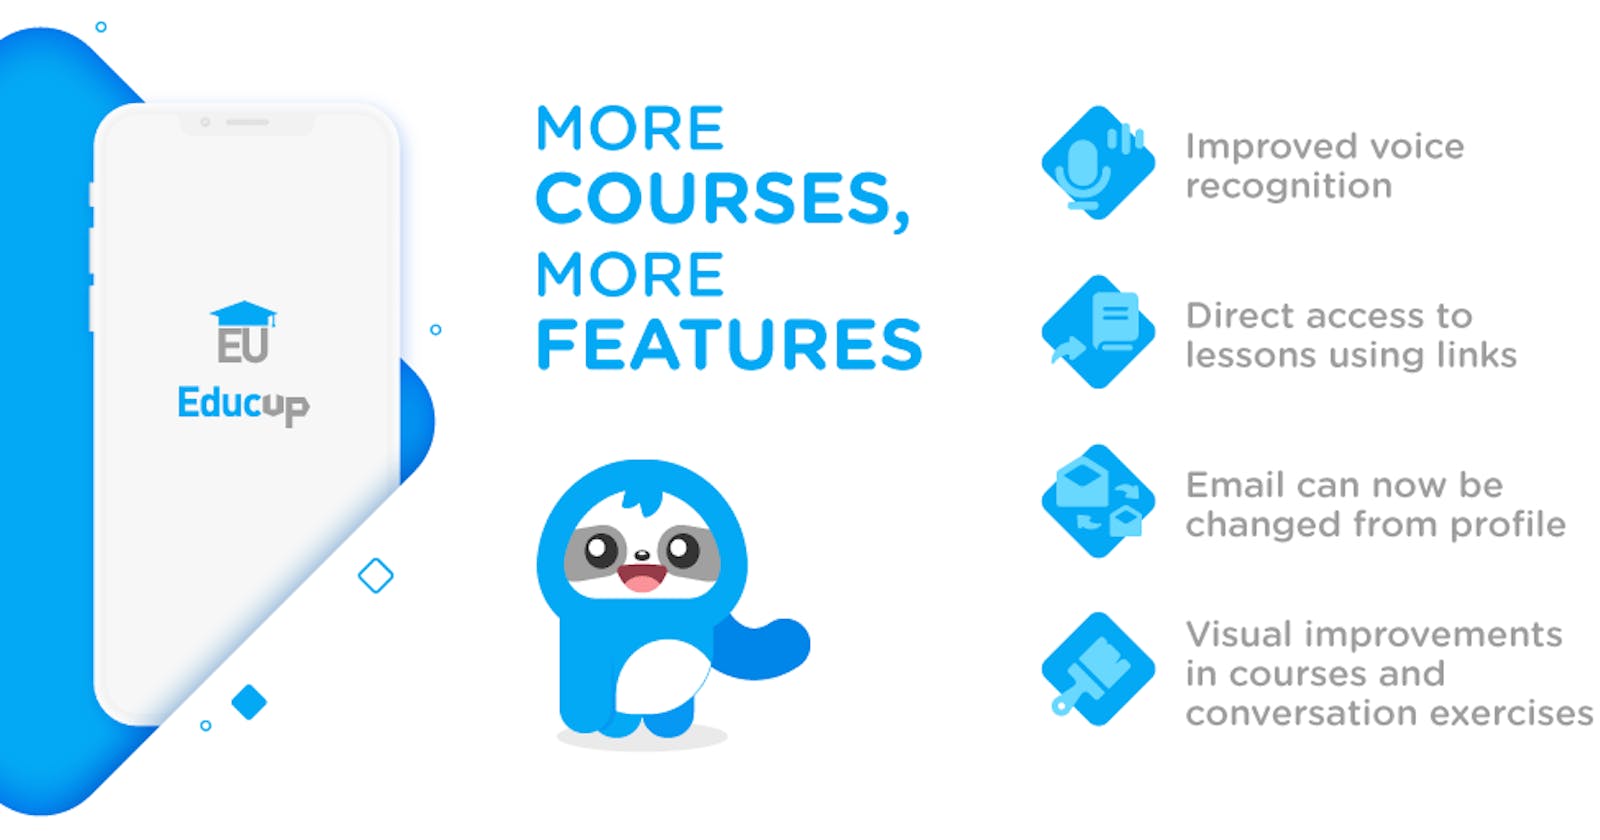 EducUp App: More courses and more features!